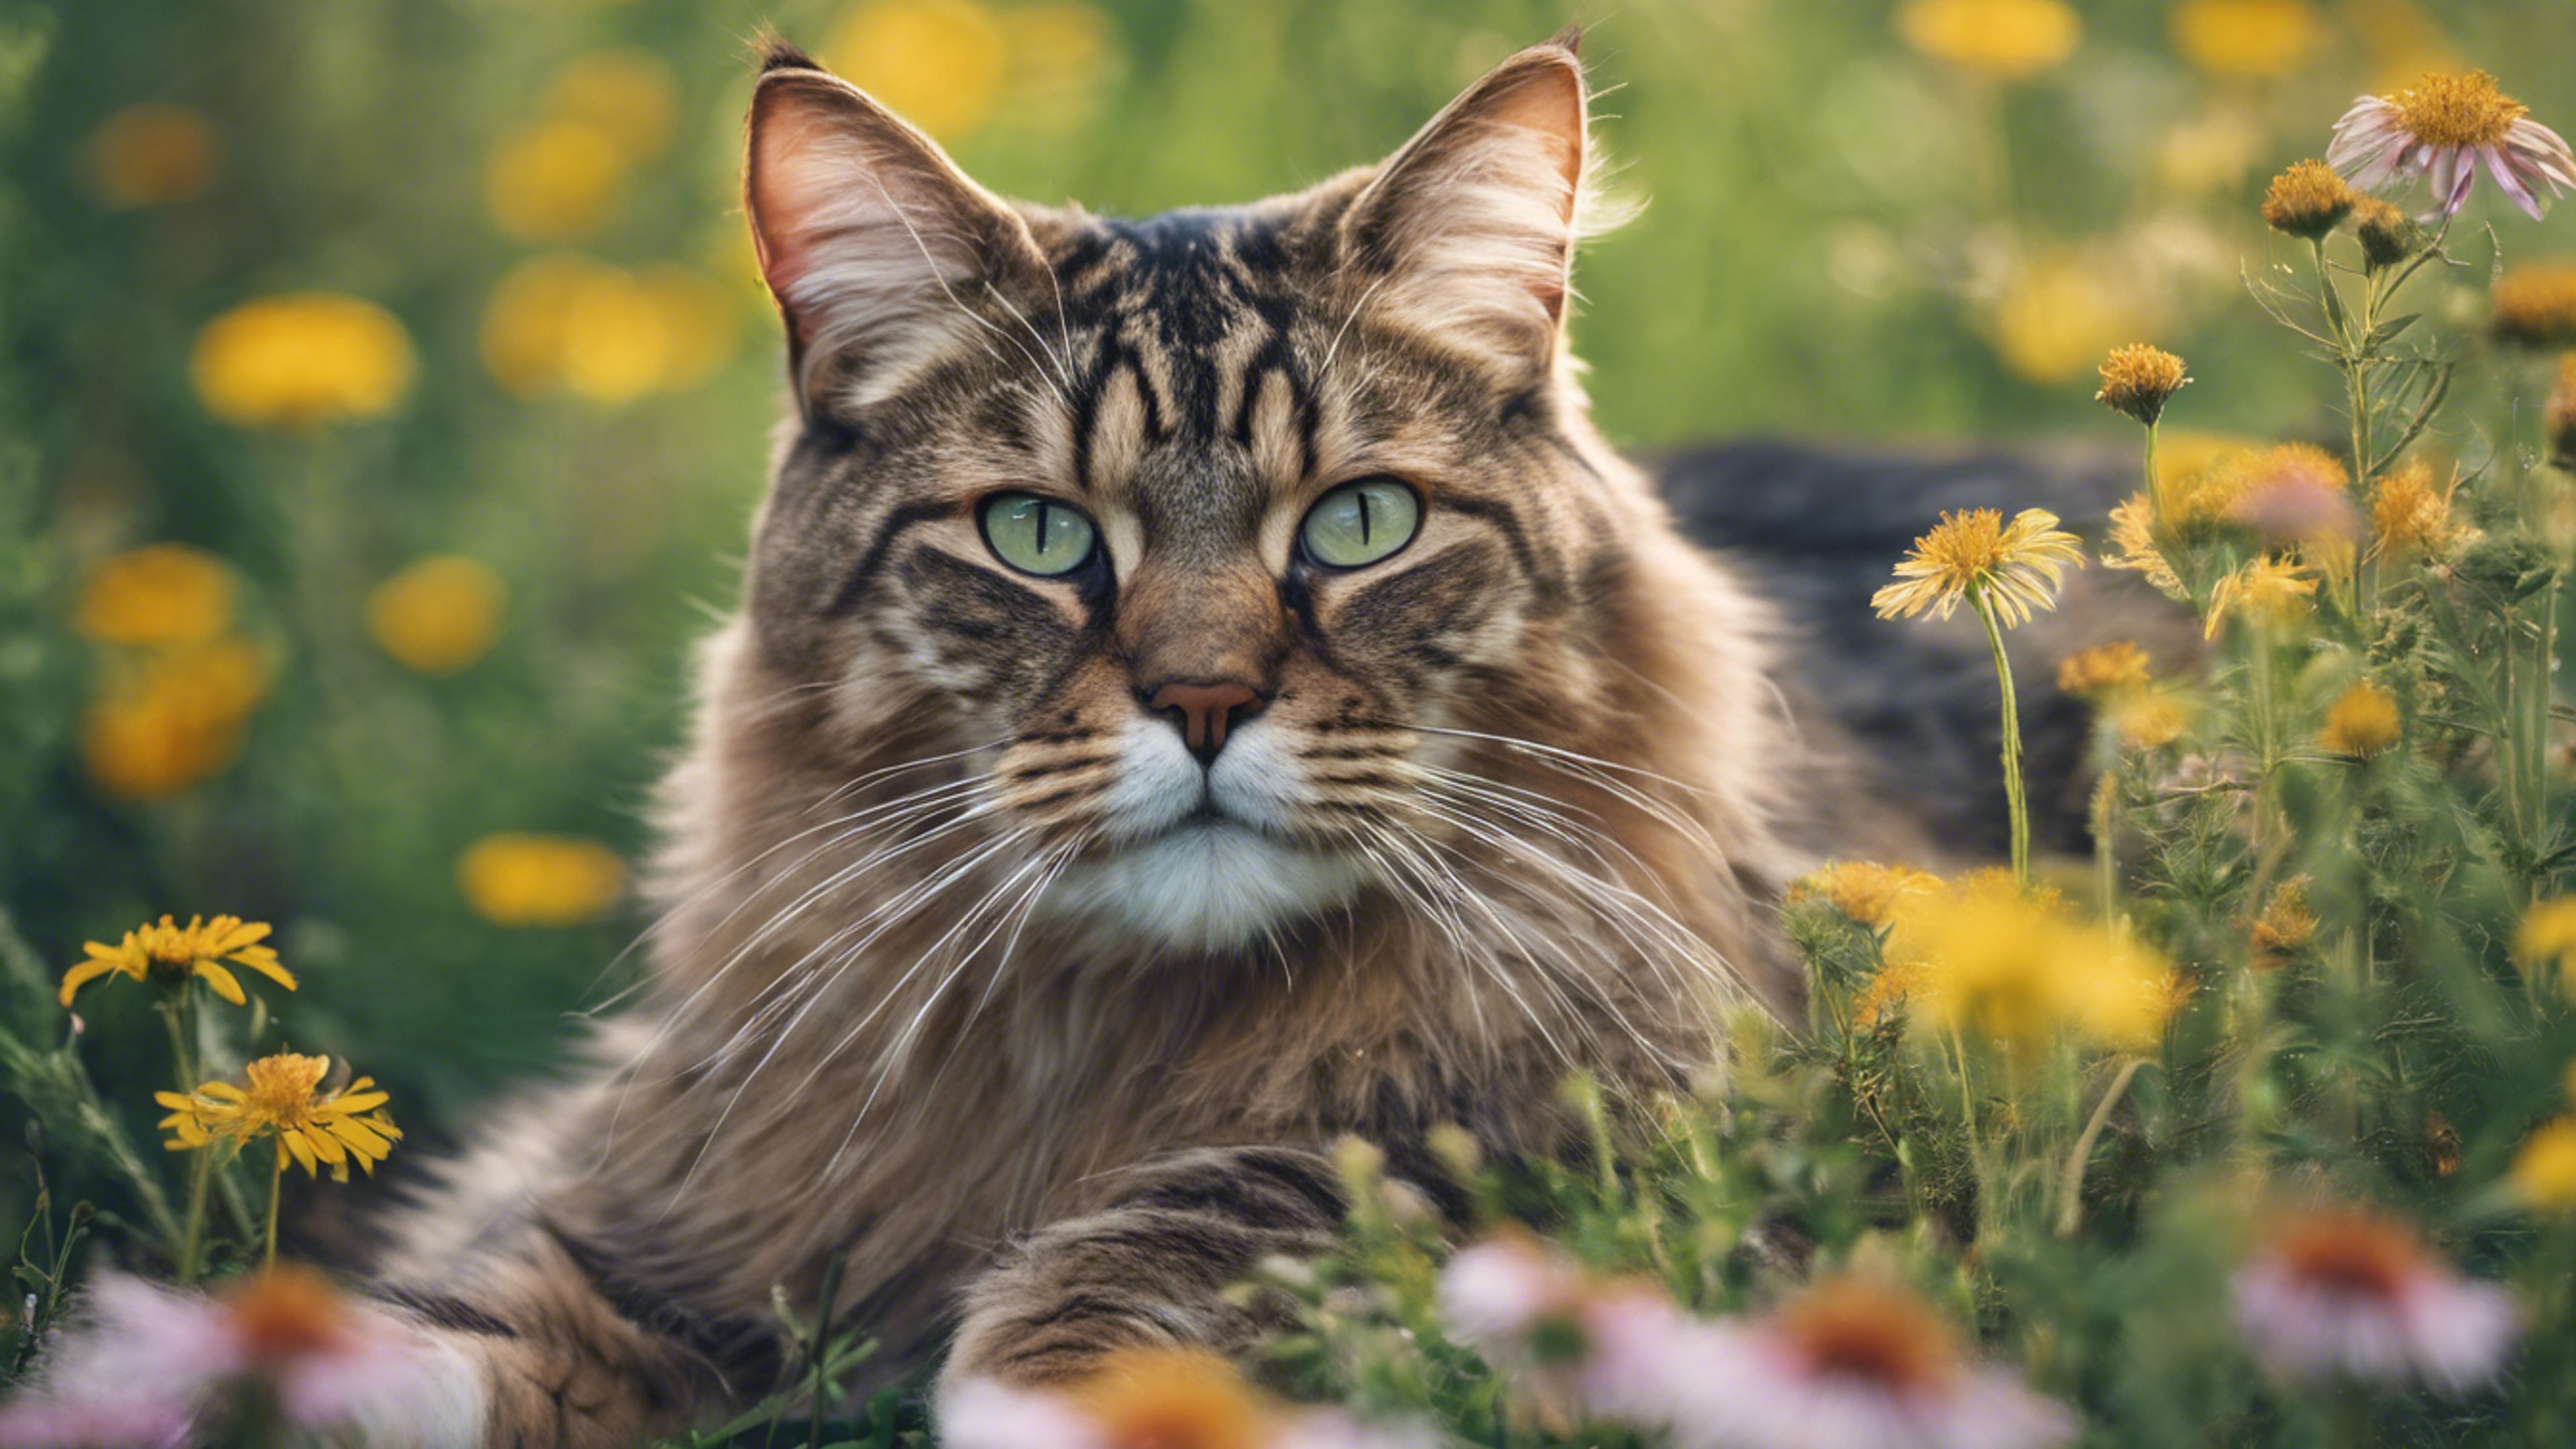 A very large, Maine Coon cat sprawled out in a patch of wildflowers on a warm summer's day.壁紙[6c1146436d6d496ca819]